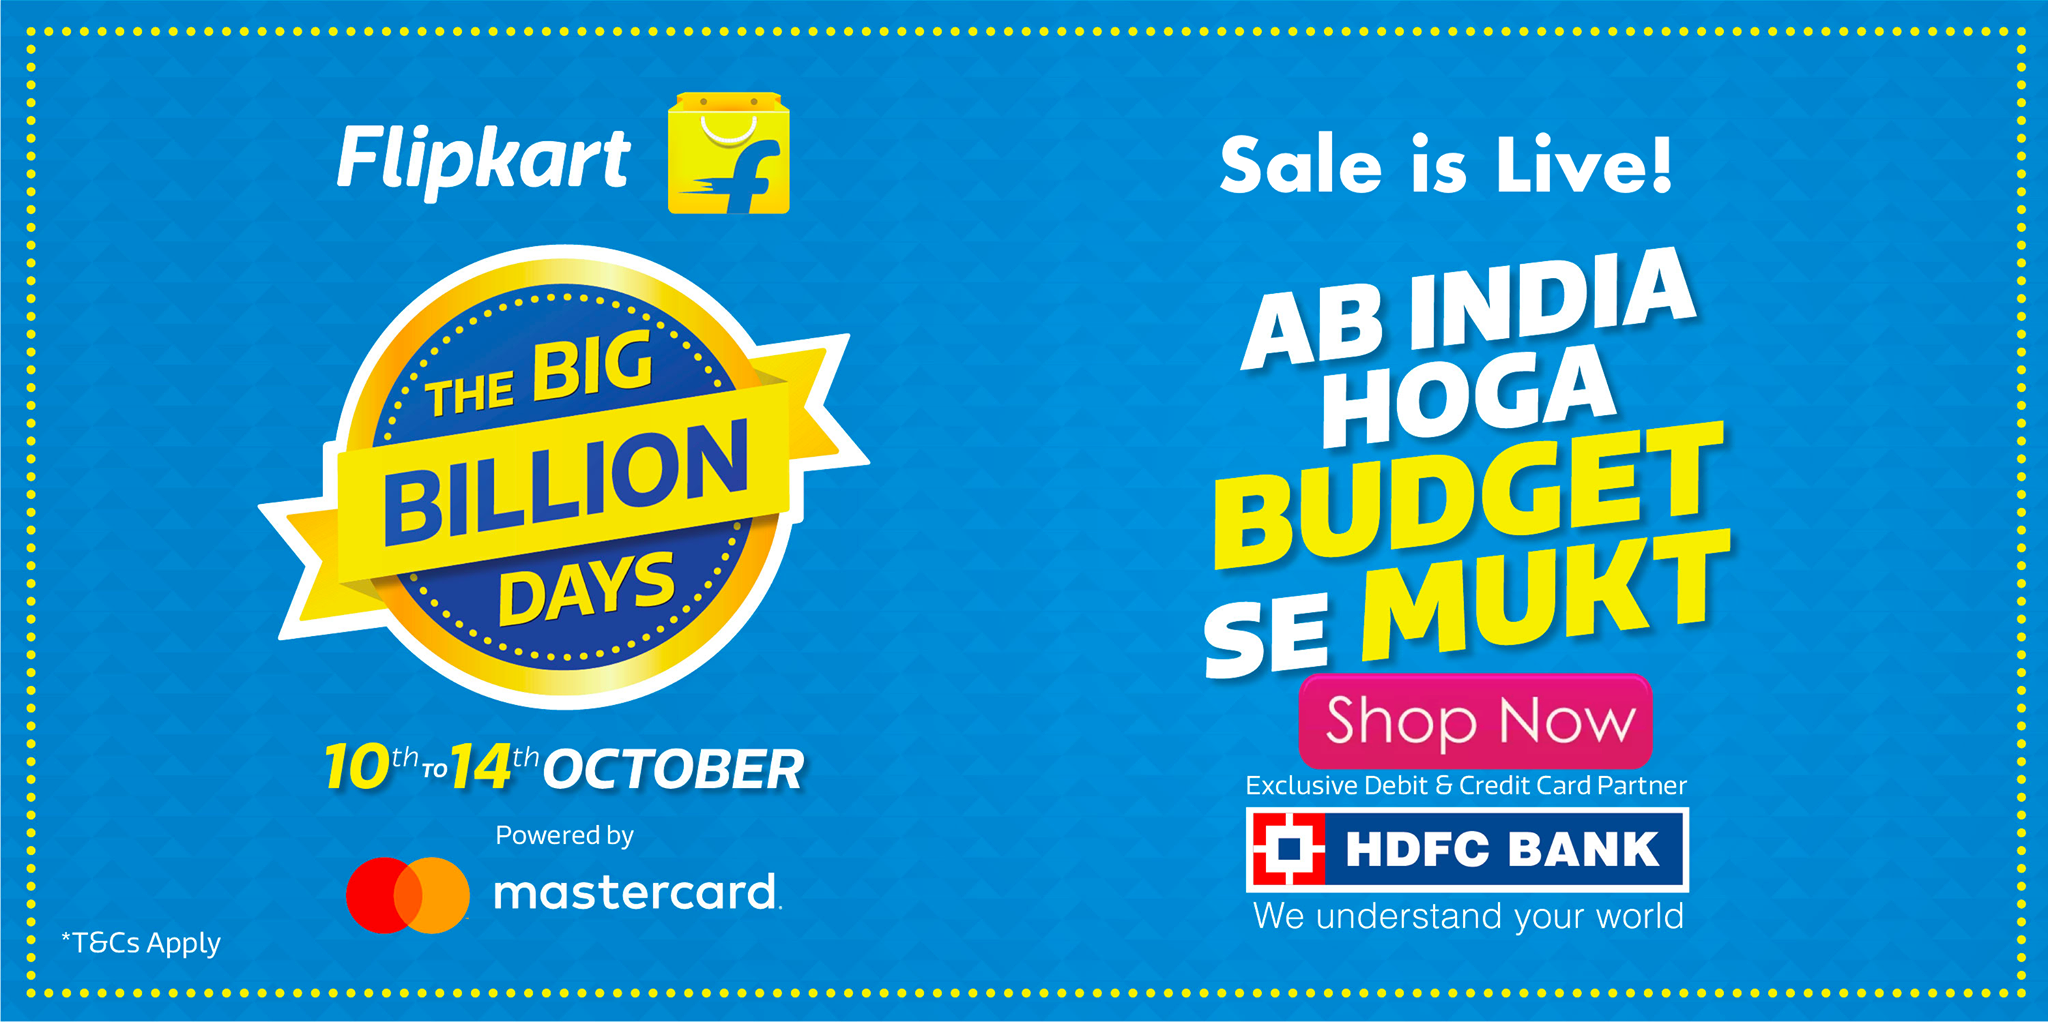 From today to October 14, Flipkart BIG MILLION SALE will give a heavy discount on these smartphones!